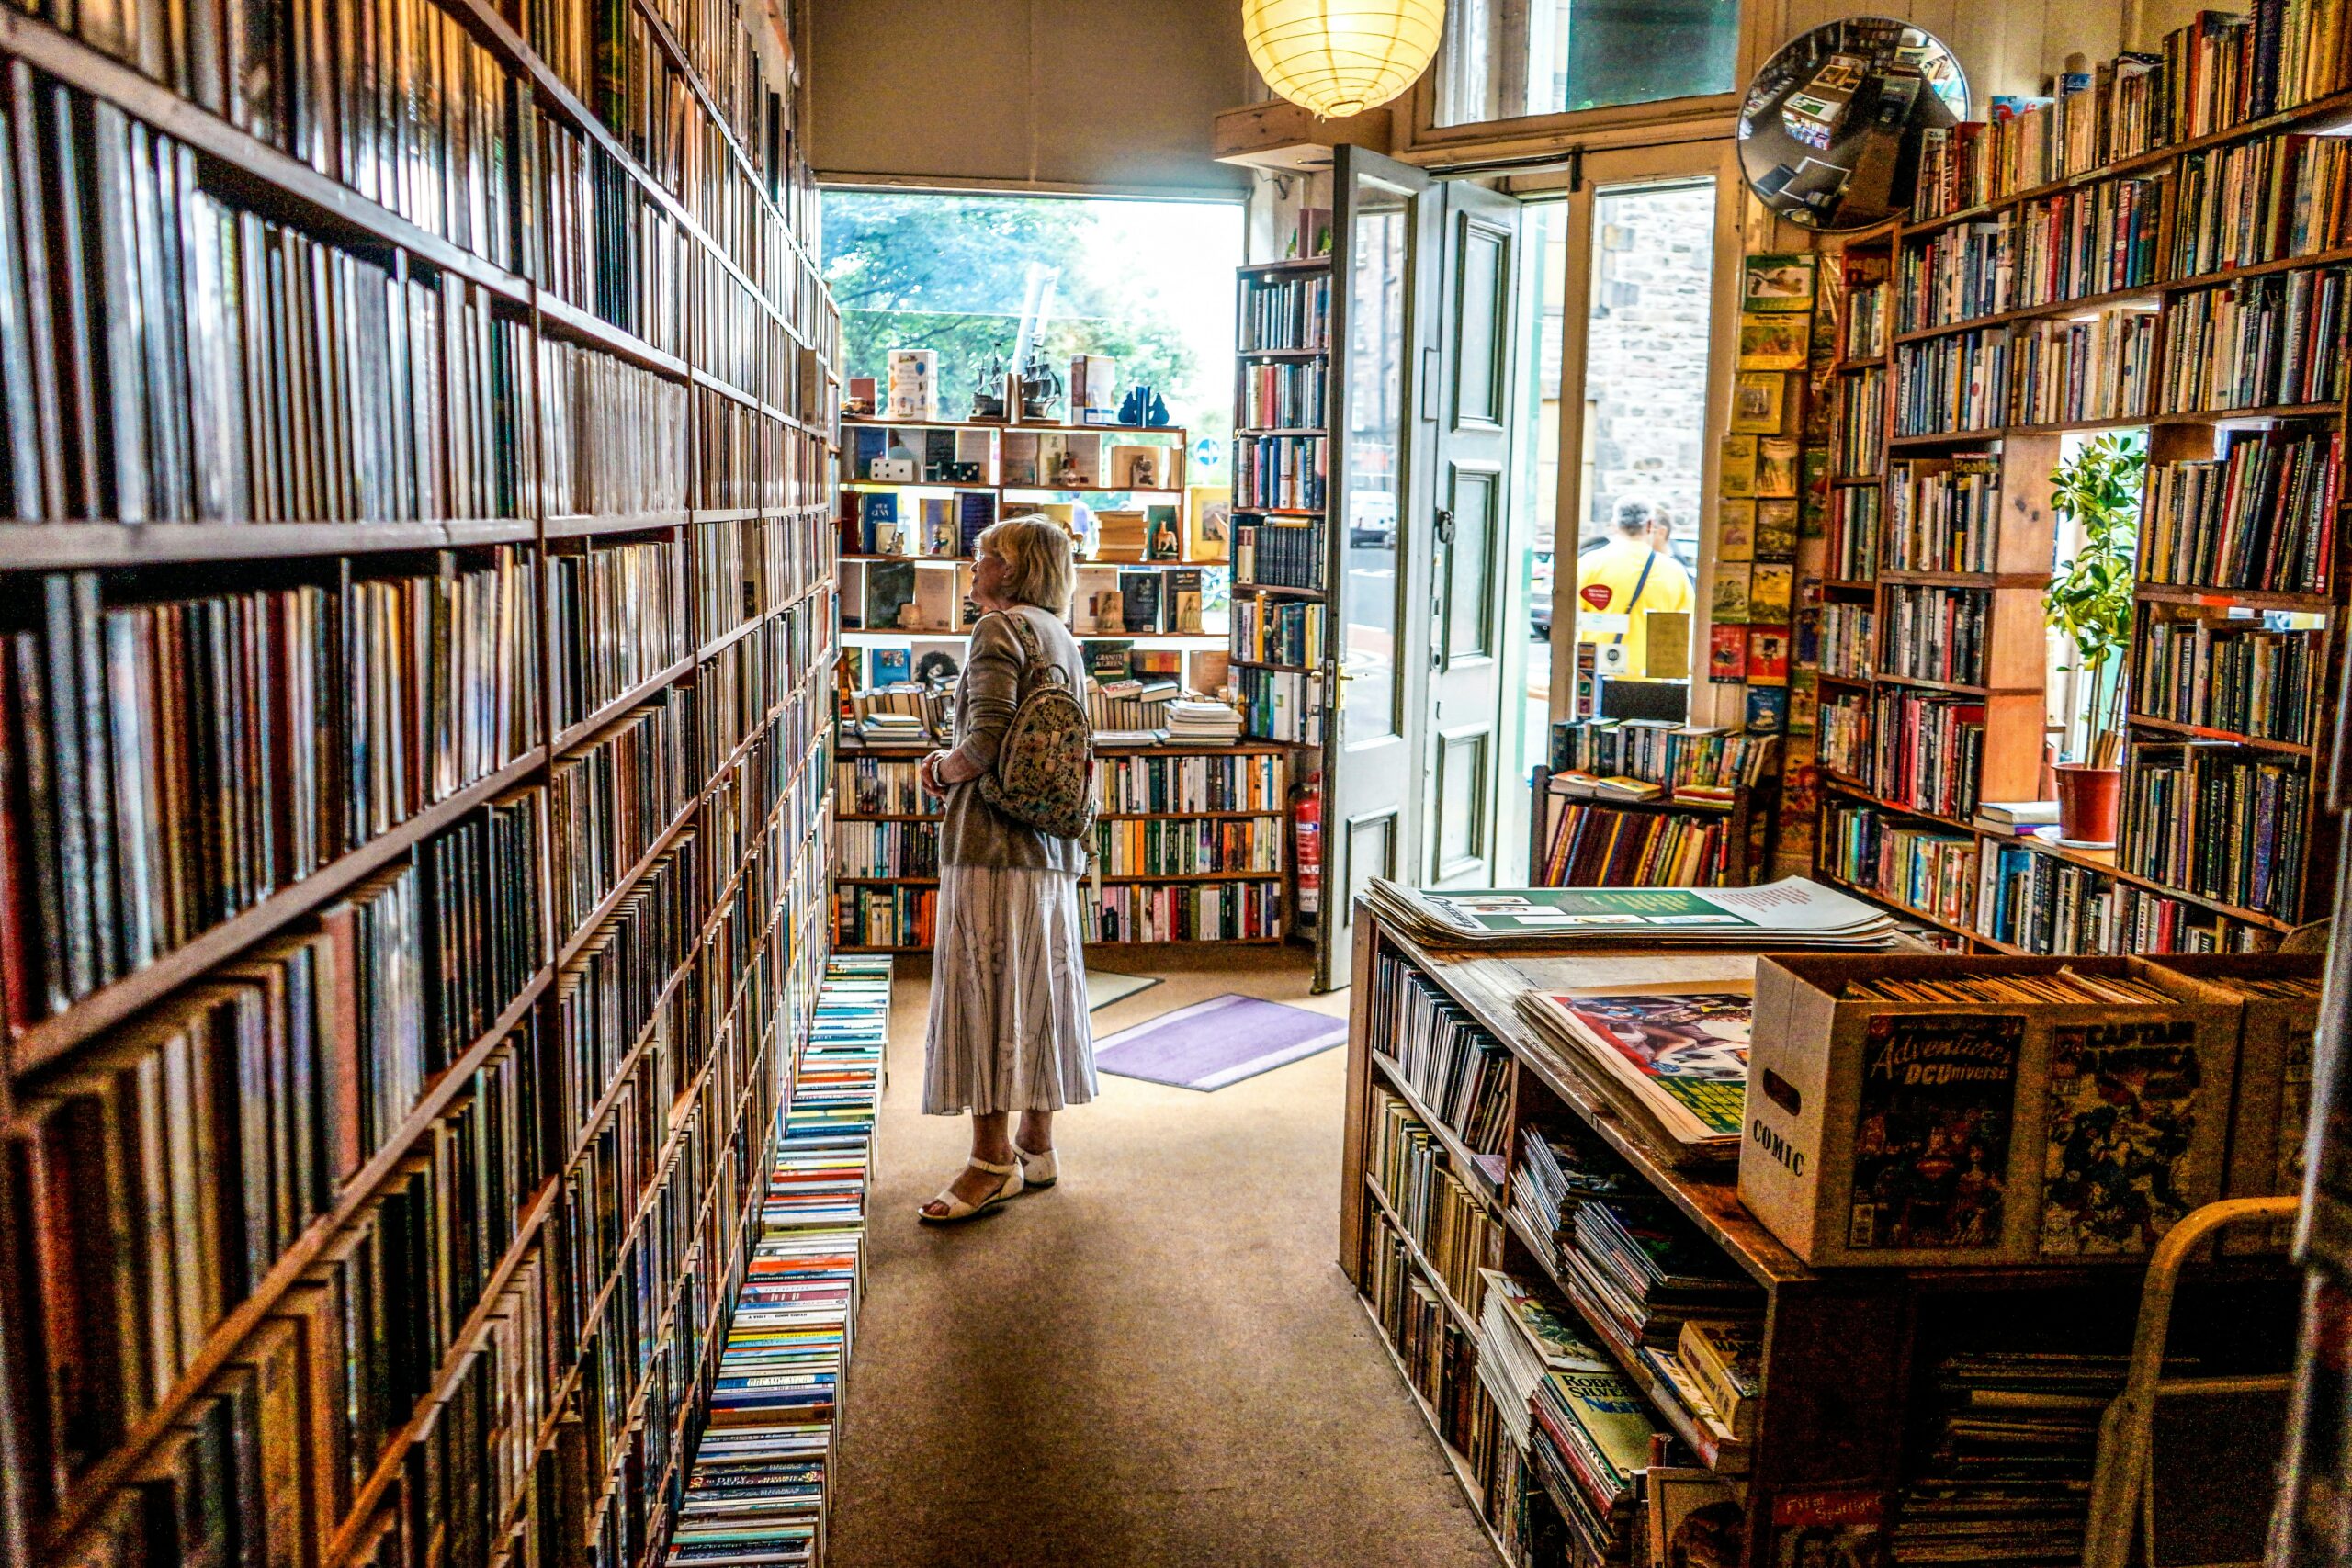 A photograph of a woman shopping in a bookstore.